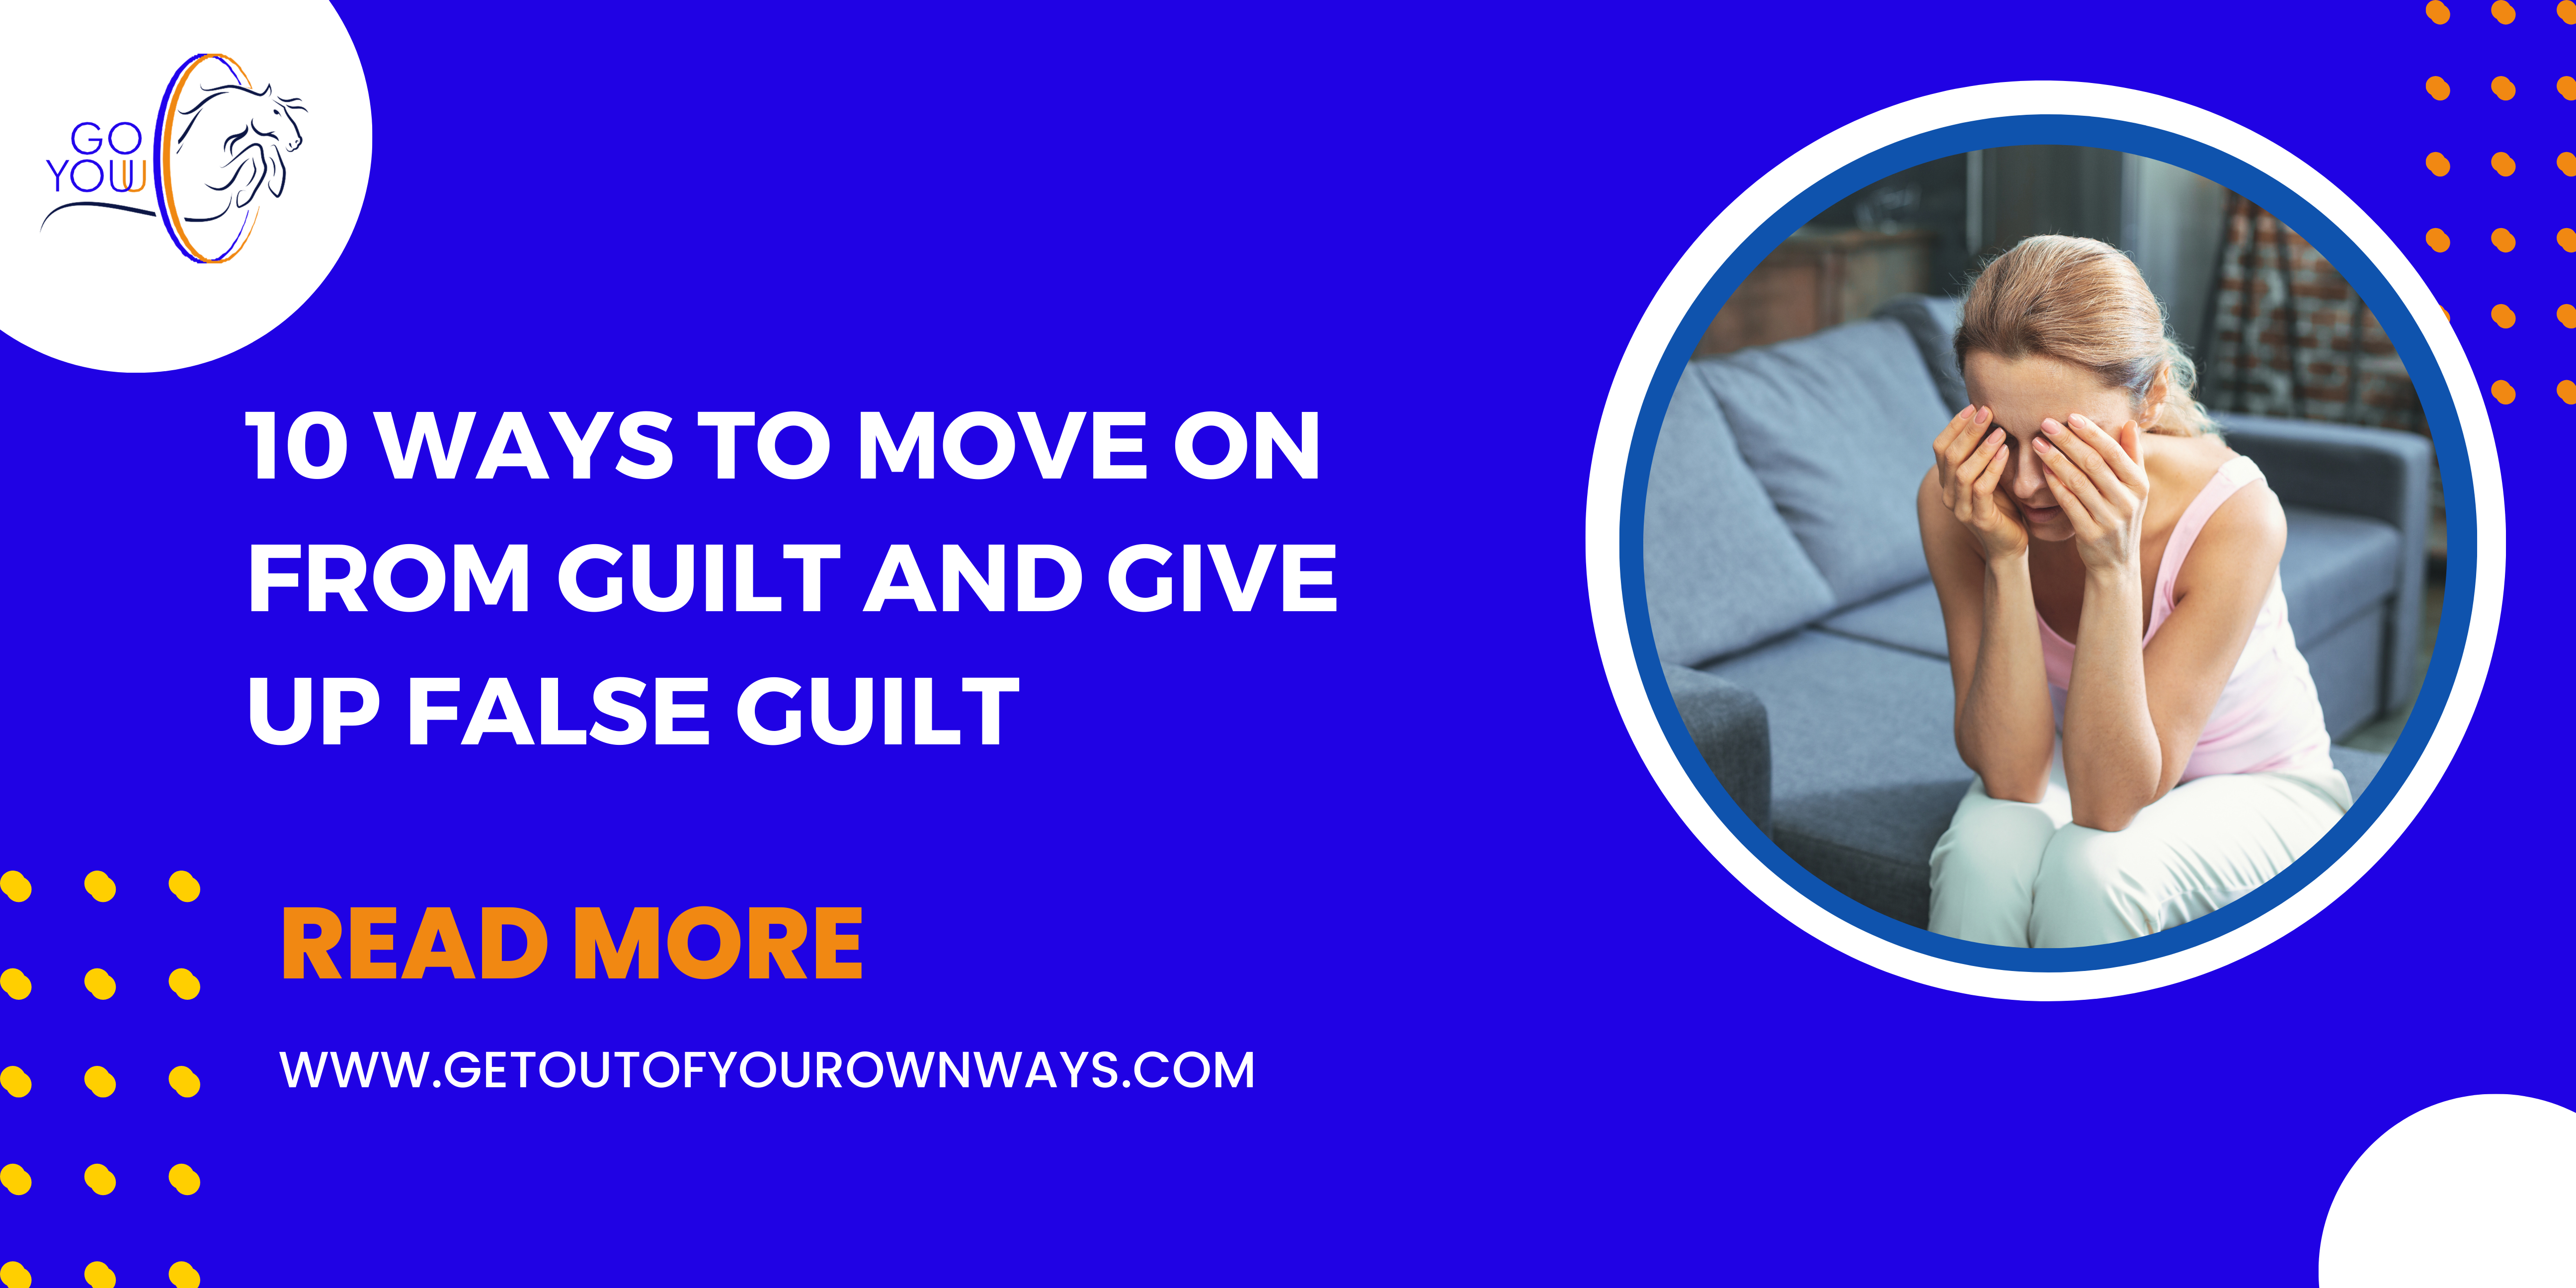 guilt and false guilt with our life coaching